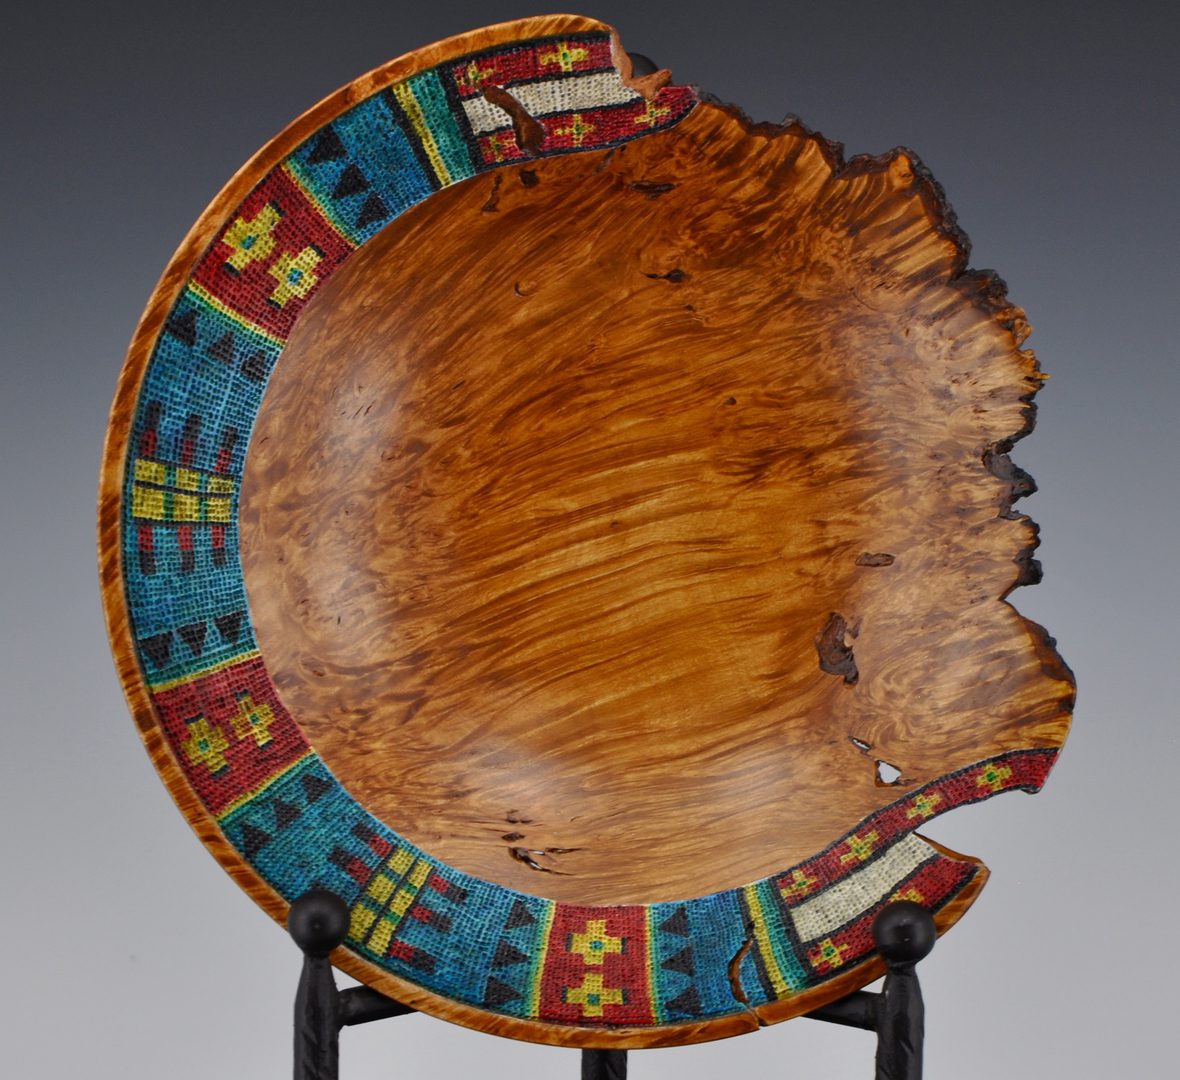 A wooden bowl with colorful designs on it.